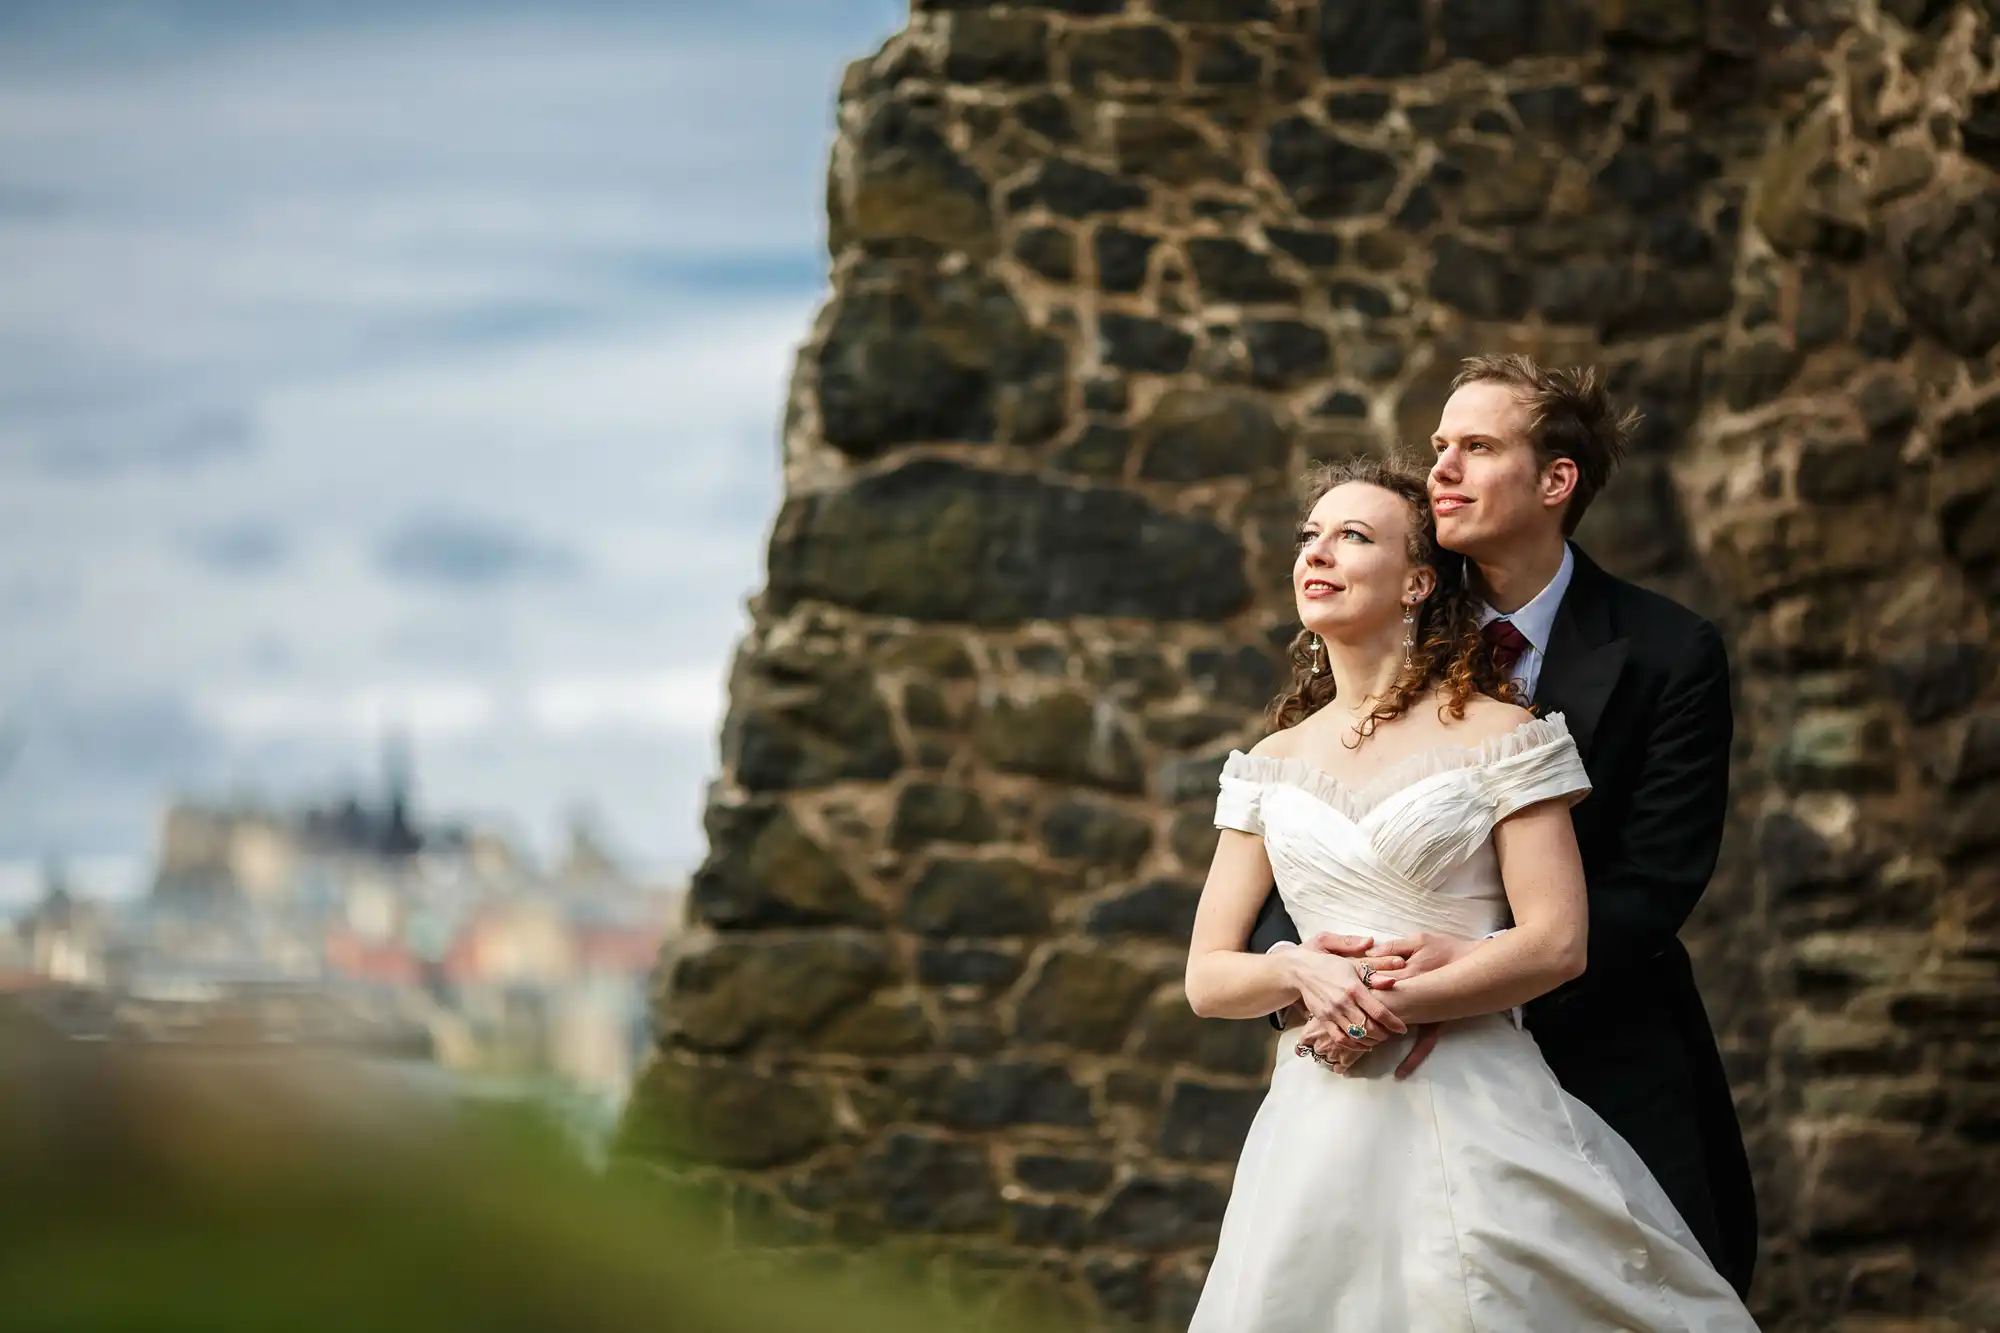 A bride and groom stand together near old stone ruins, looking into the distance with a cityscape in the background.